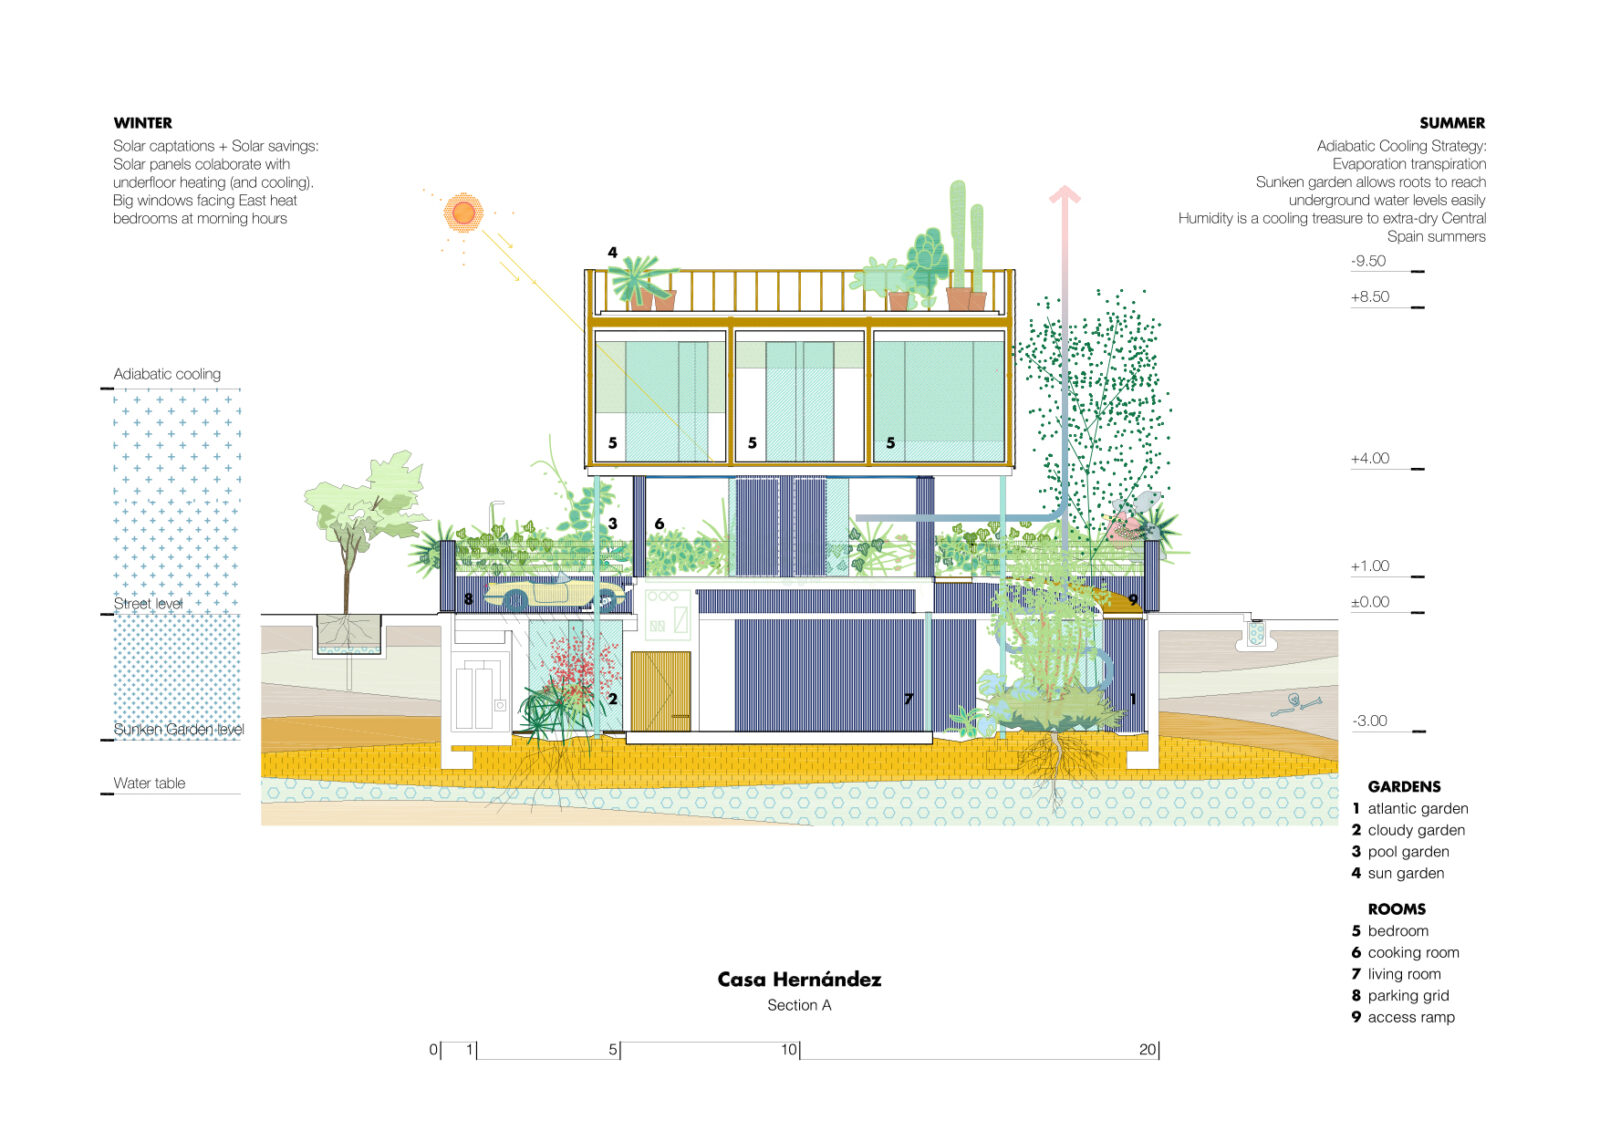 Archisearch ΕΣΩ 2022_Meet the speakers | Casa Hernández - A single family house on the outskirts of Madrid by LNA studio